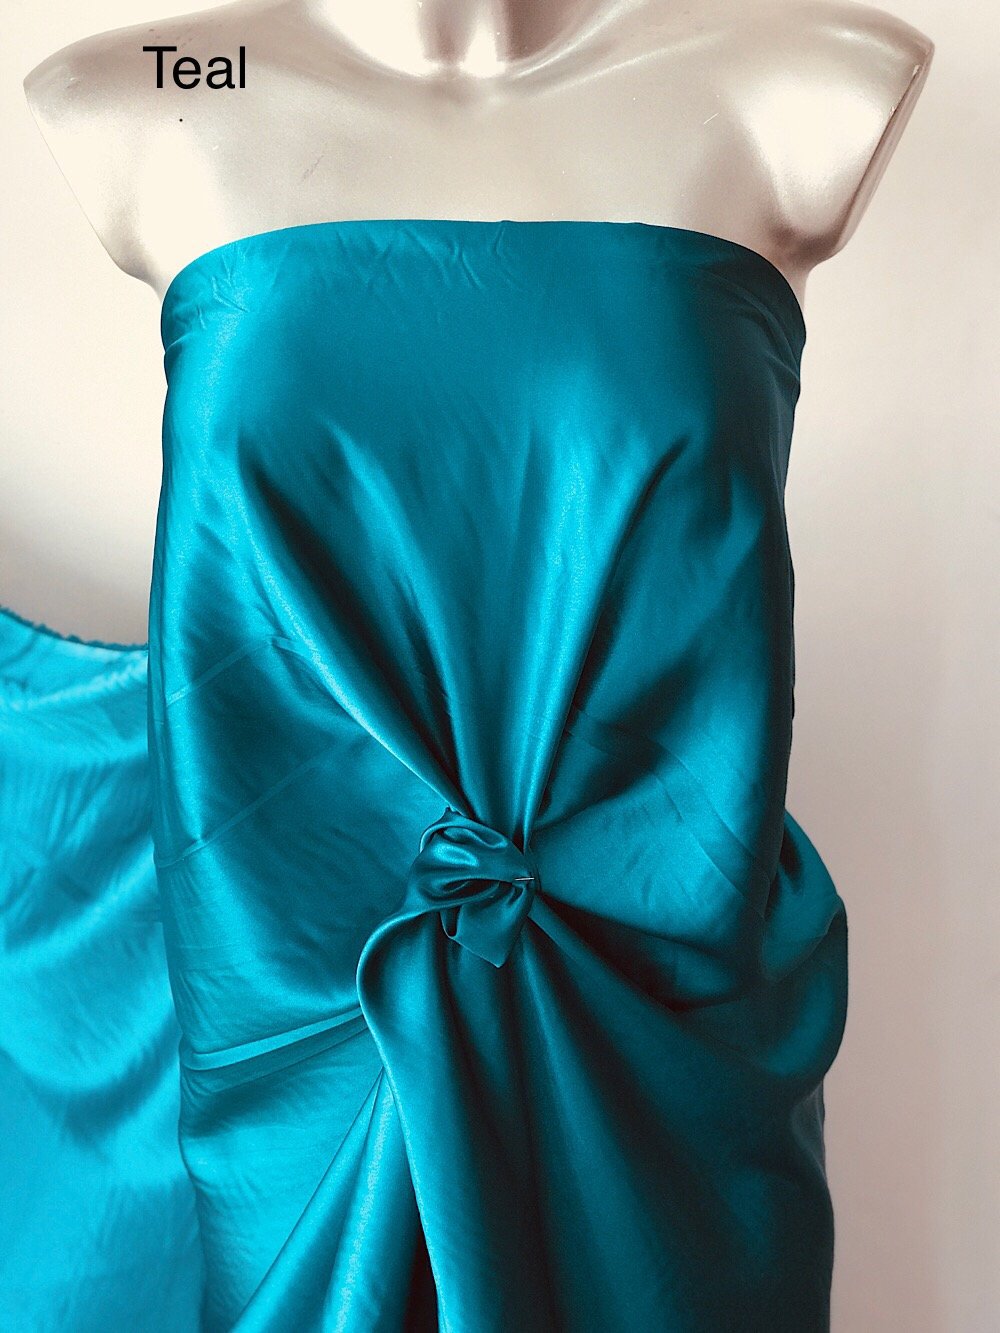 green shiny satin fabric polyester spandex 2 way stretch lining under lace lingerie colour options 150cm wide